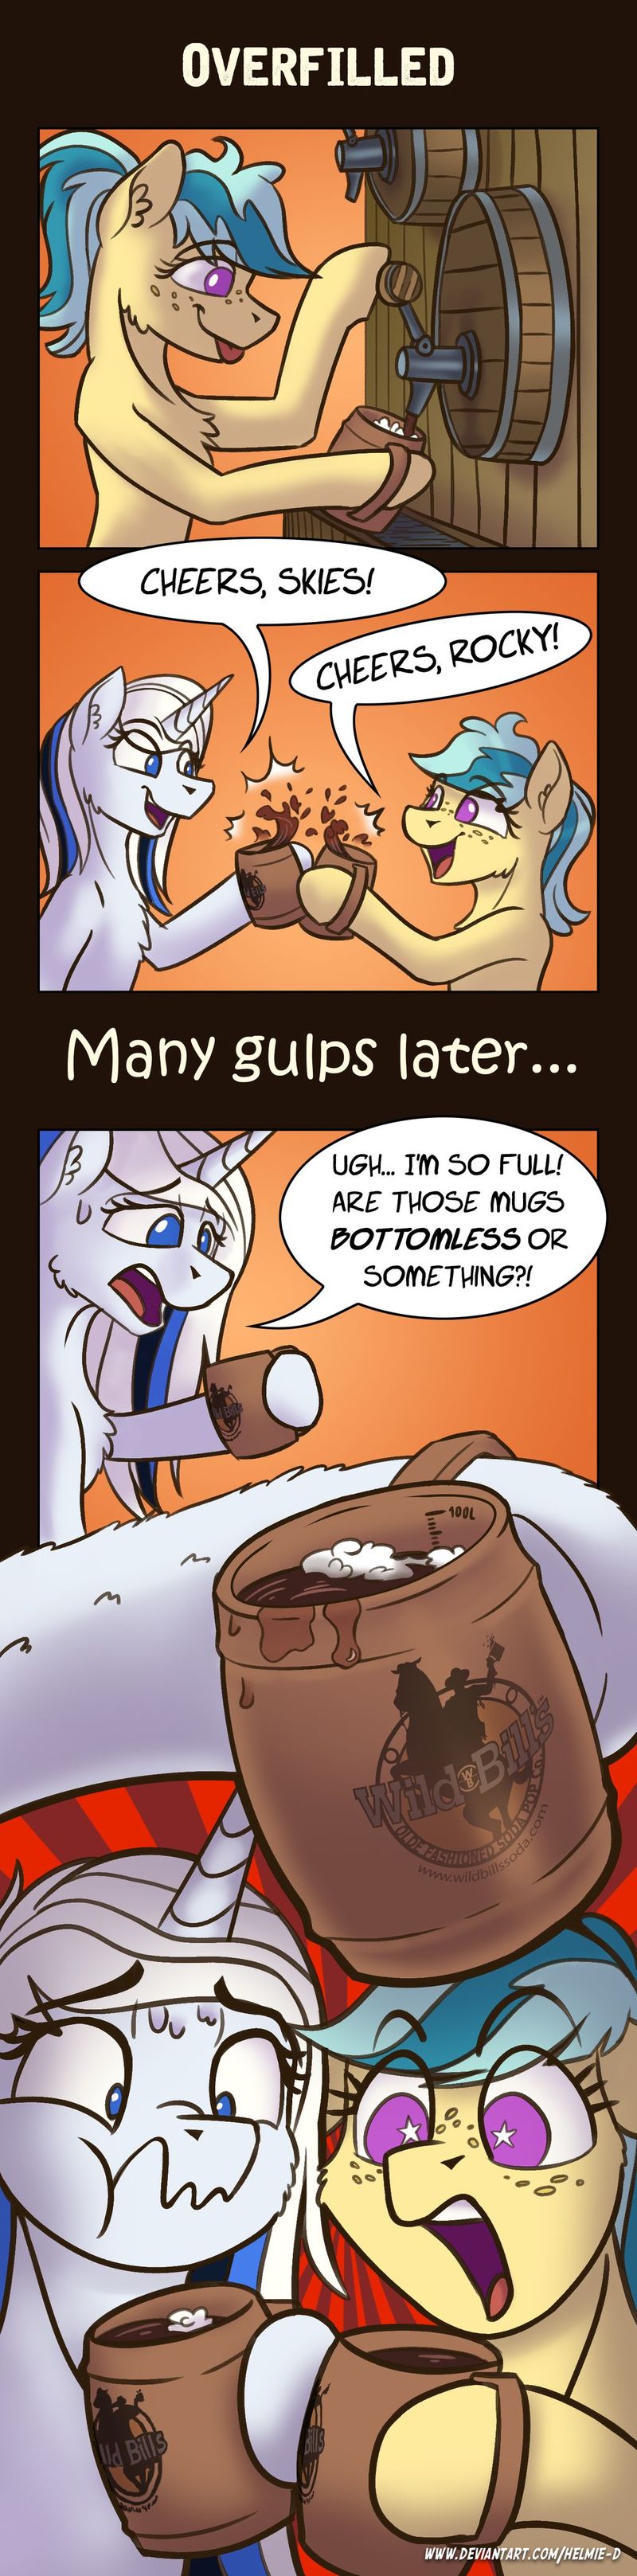 Page 1 - Overfilled